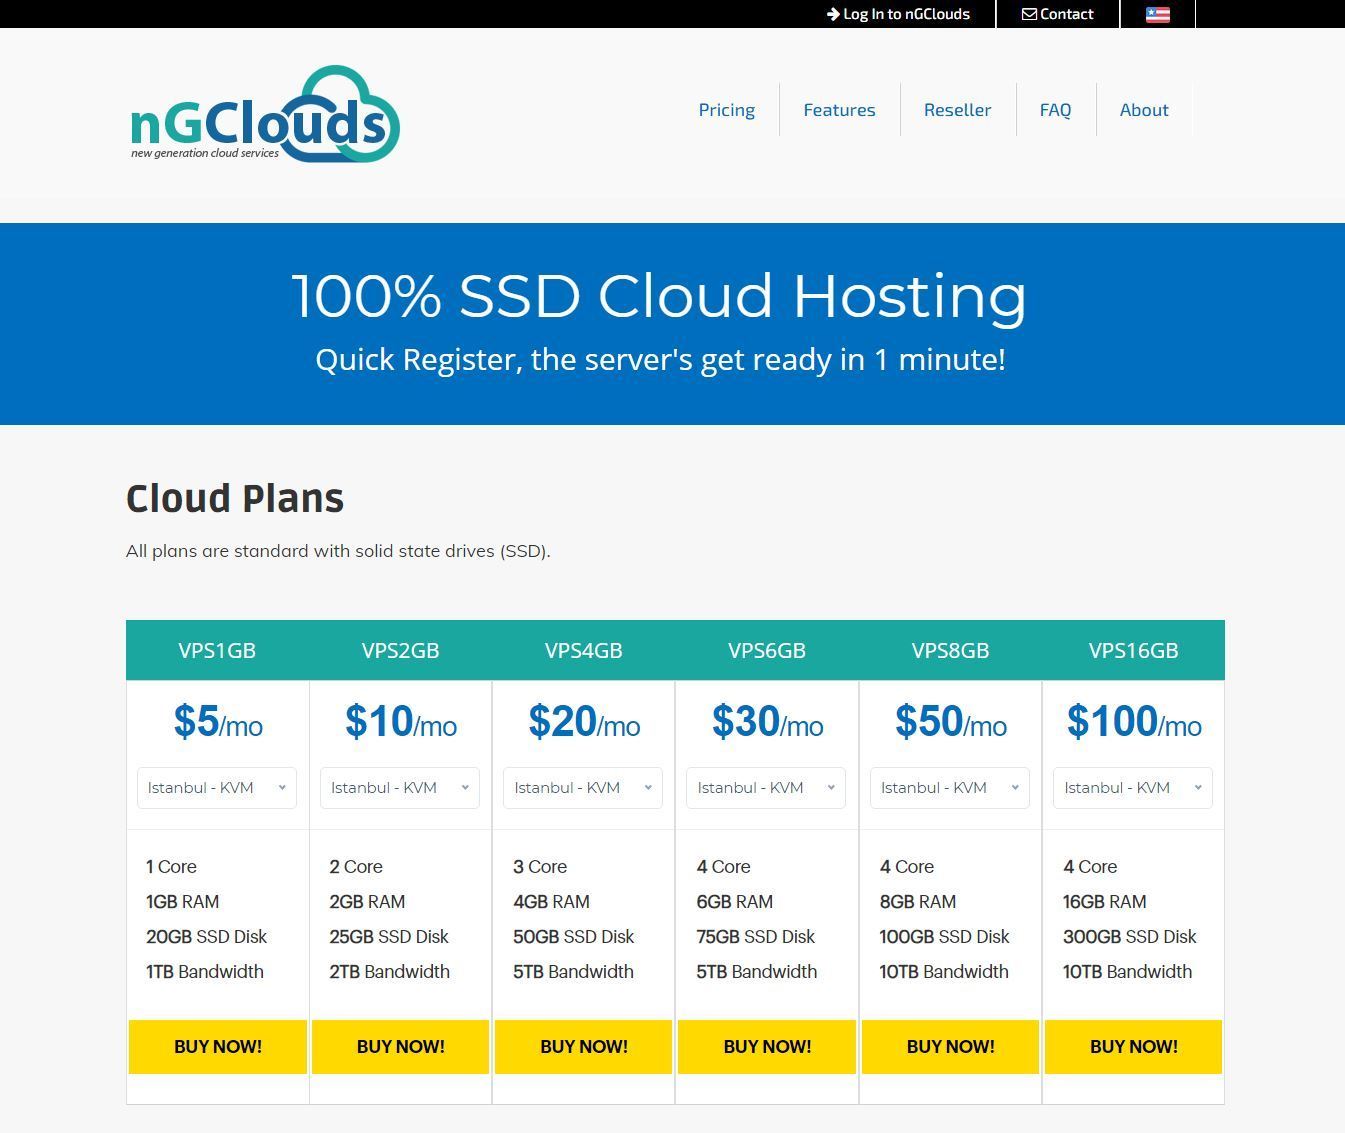 NGClouds.com - 1GB ESXI VPS for $3.50/mo in Amsterdam, Instanbul or Kansas City